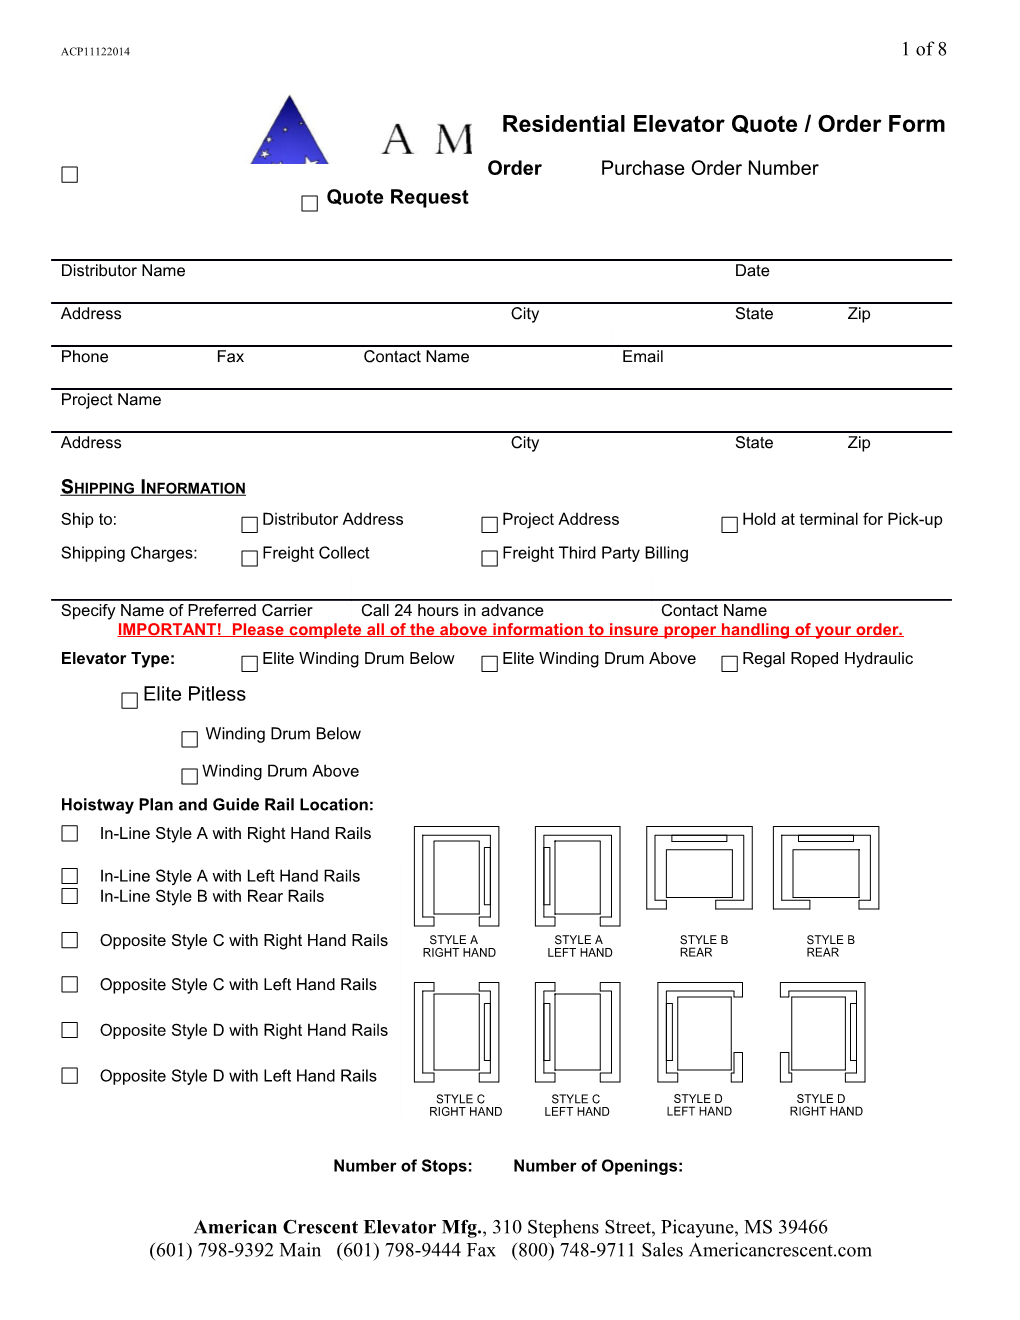 Residential Elevator Quote / Order Form